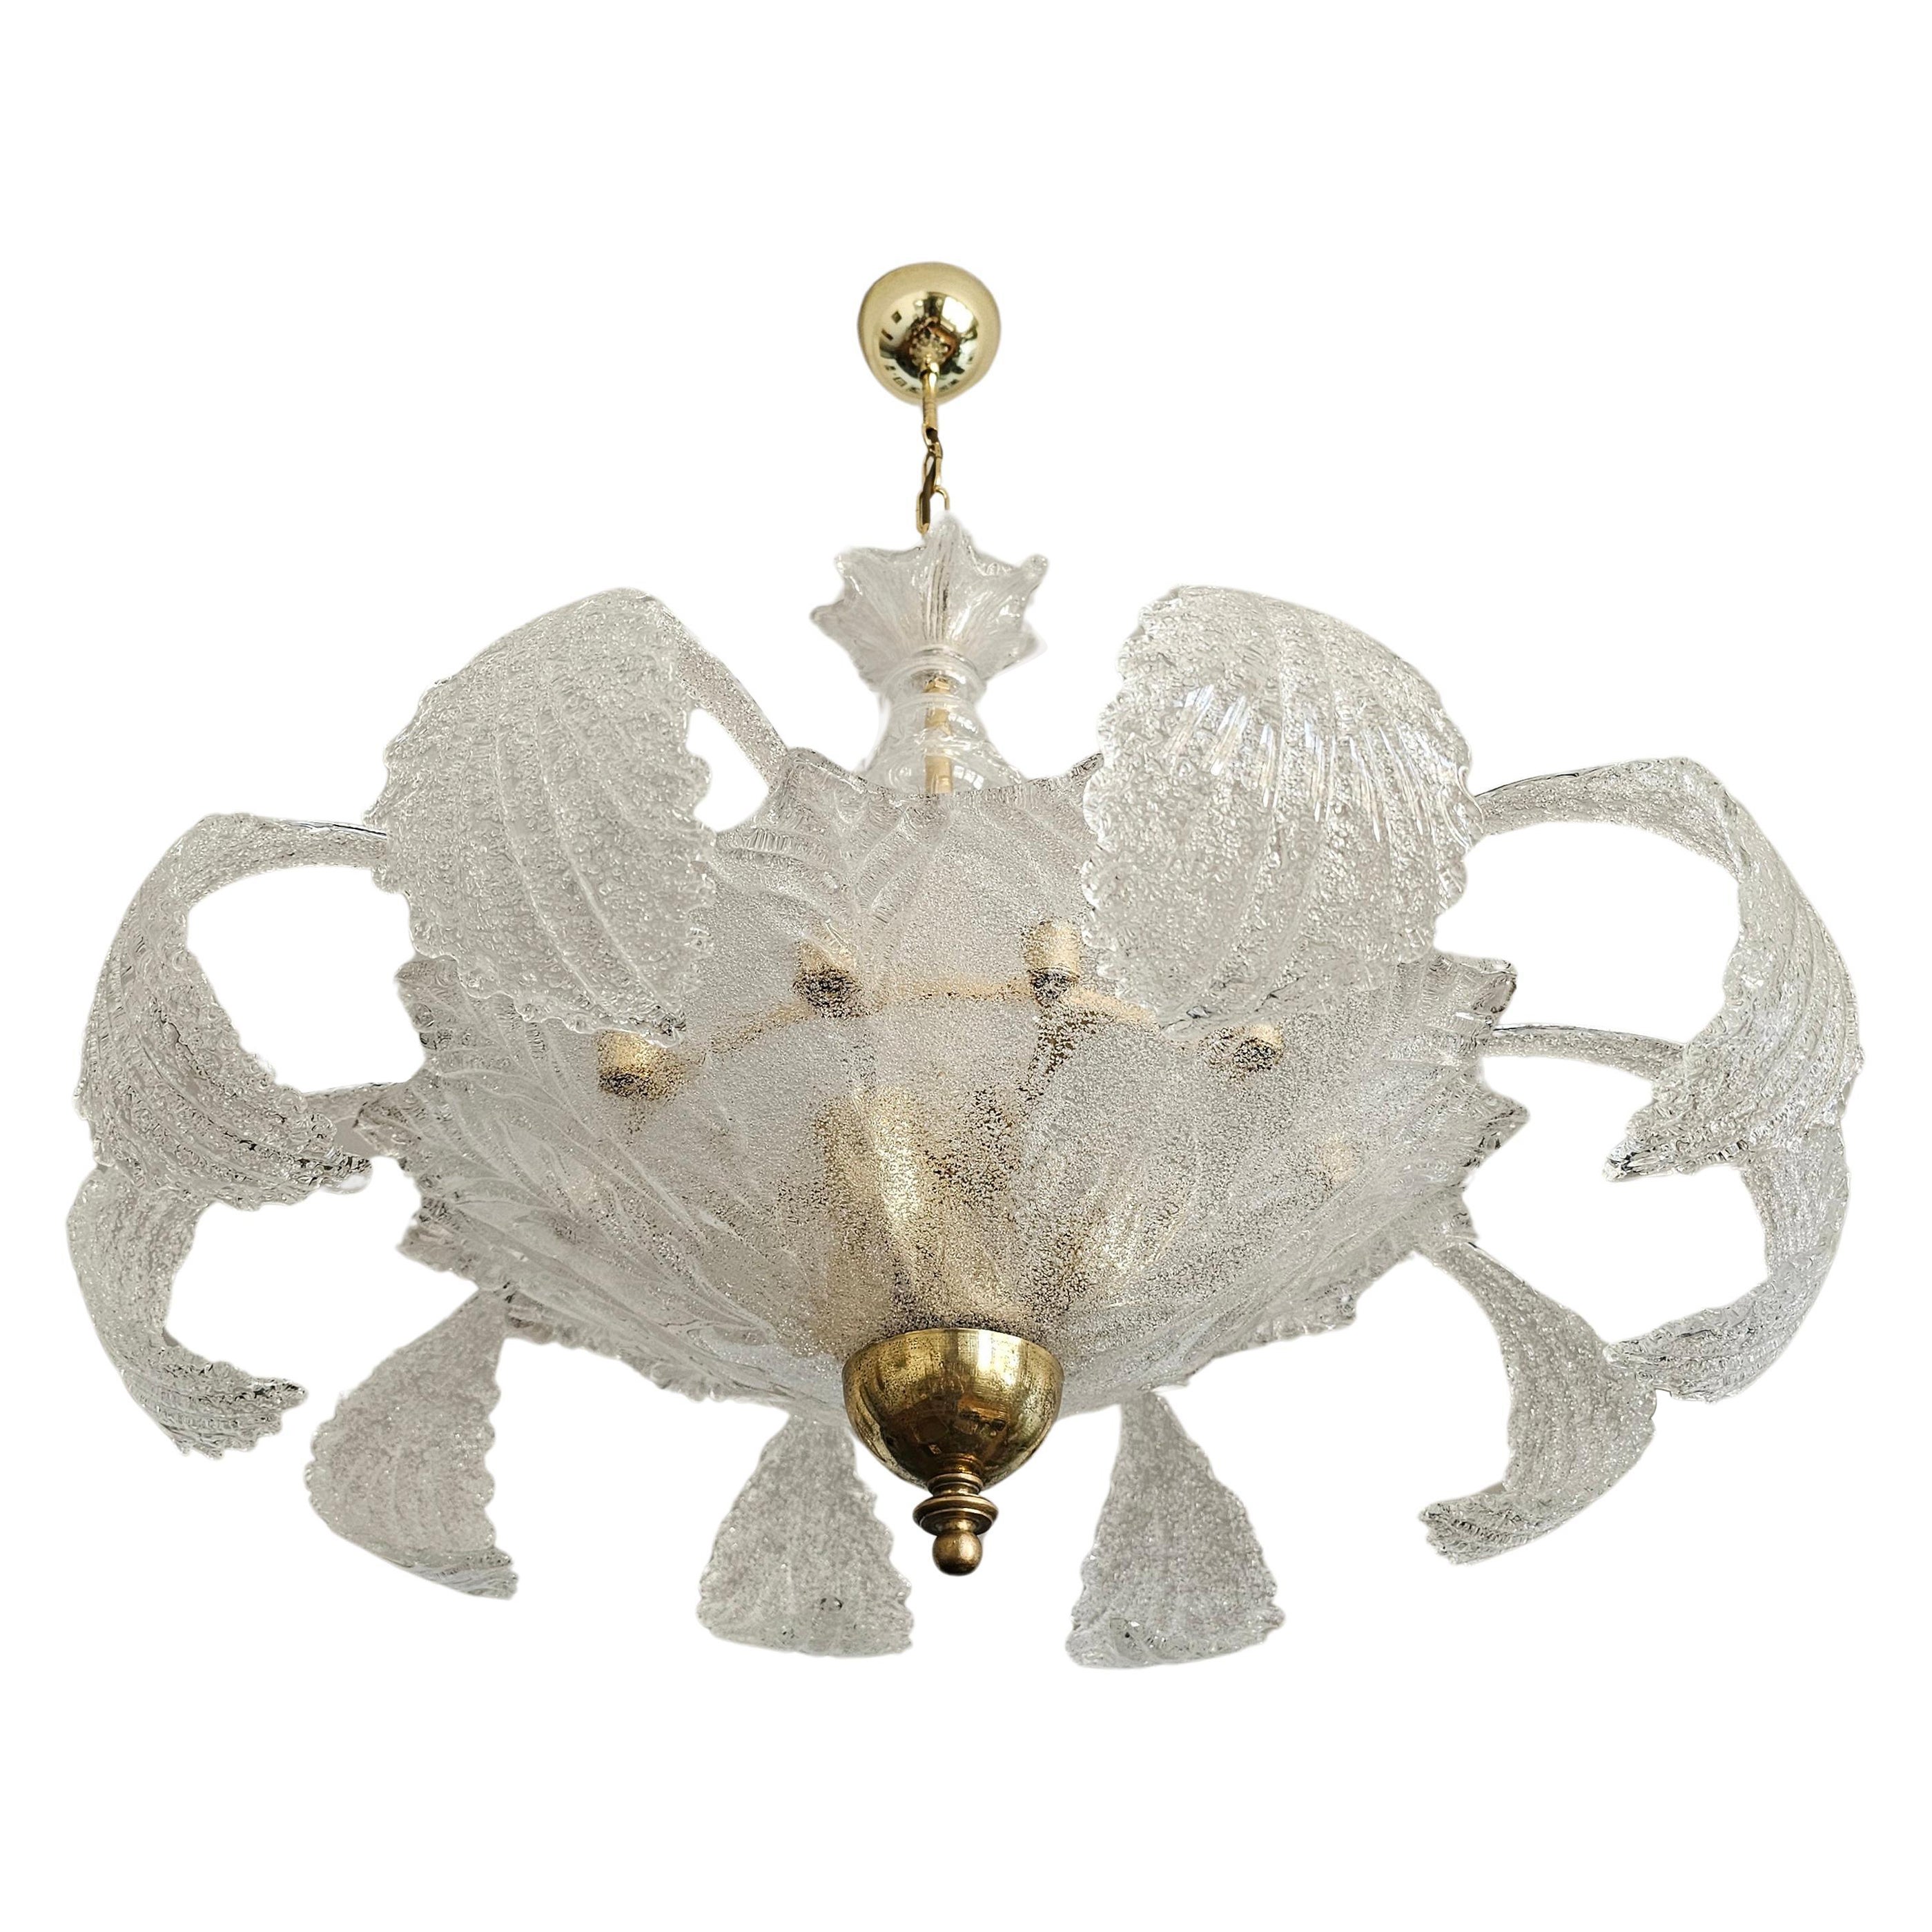 Art Deco Chandelier in style of Barovier & Toso, 10 Murano leaves, Italy 1950s